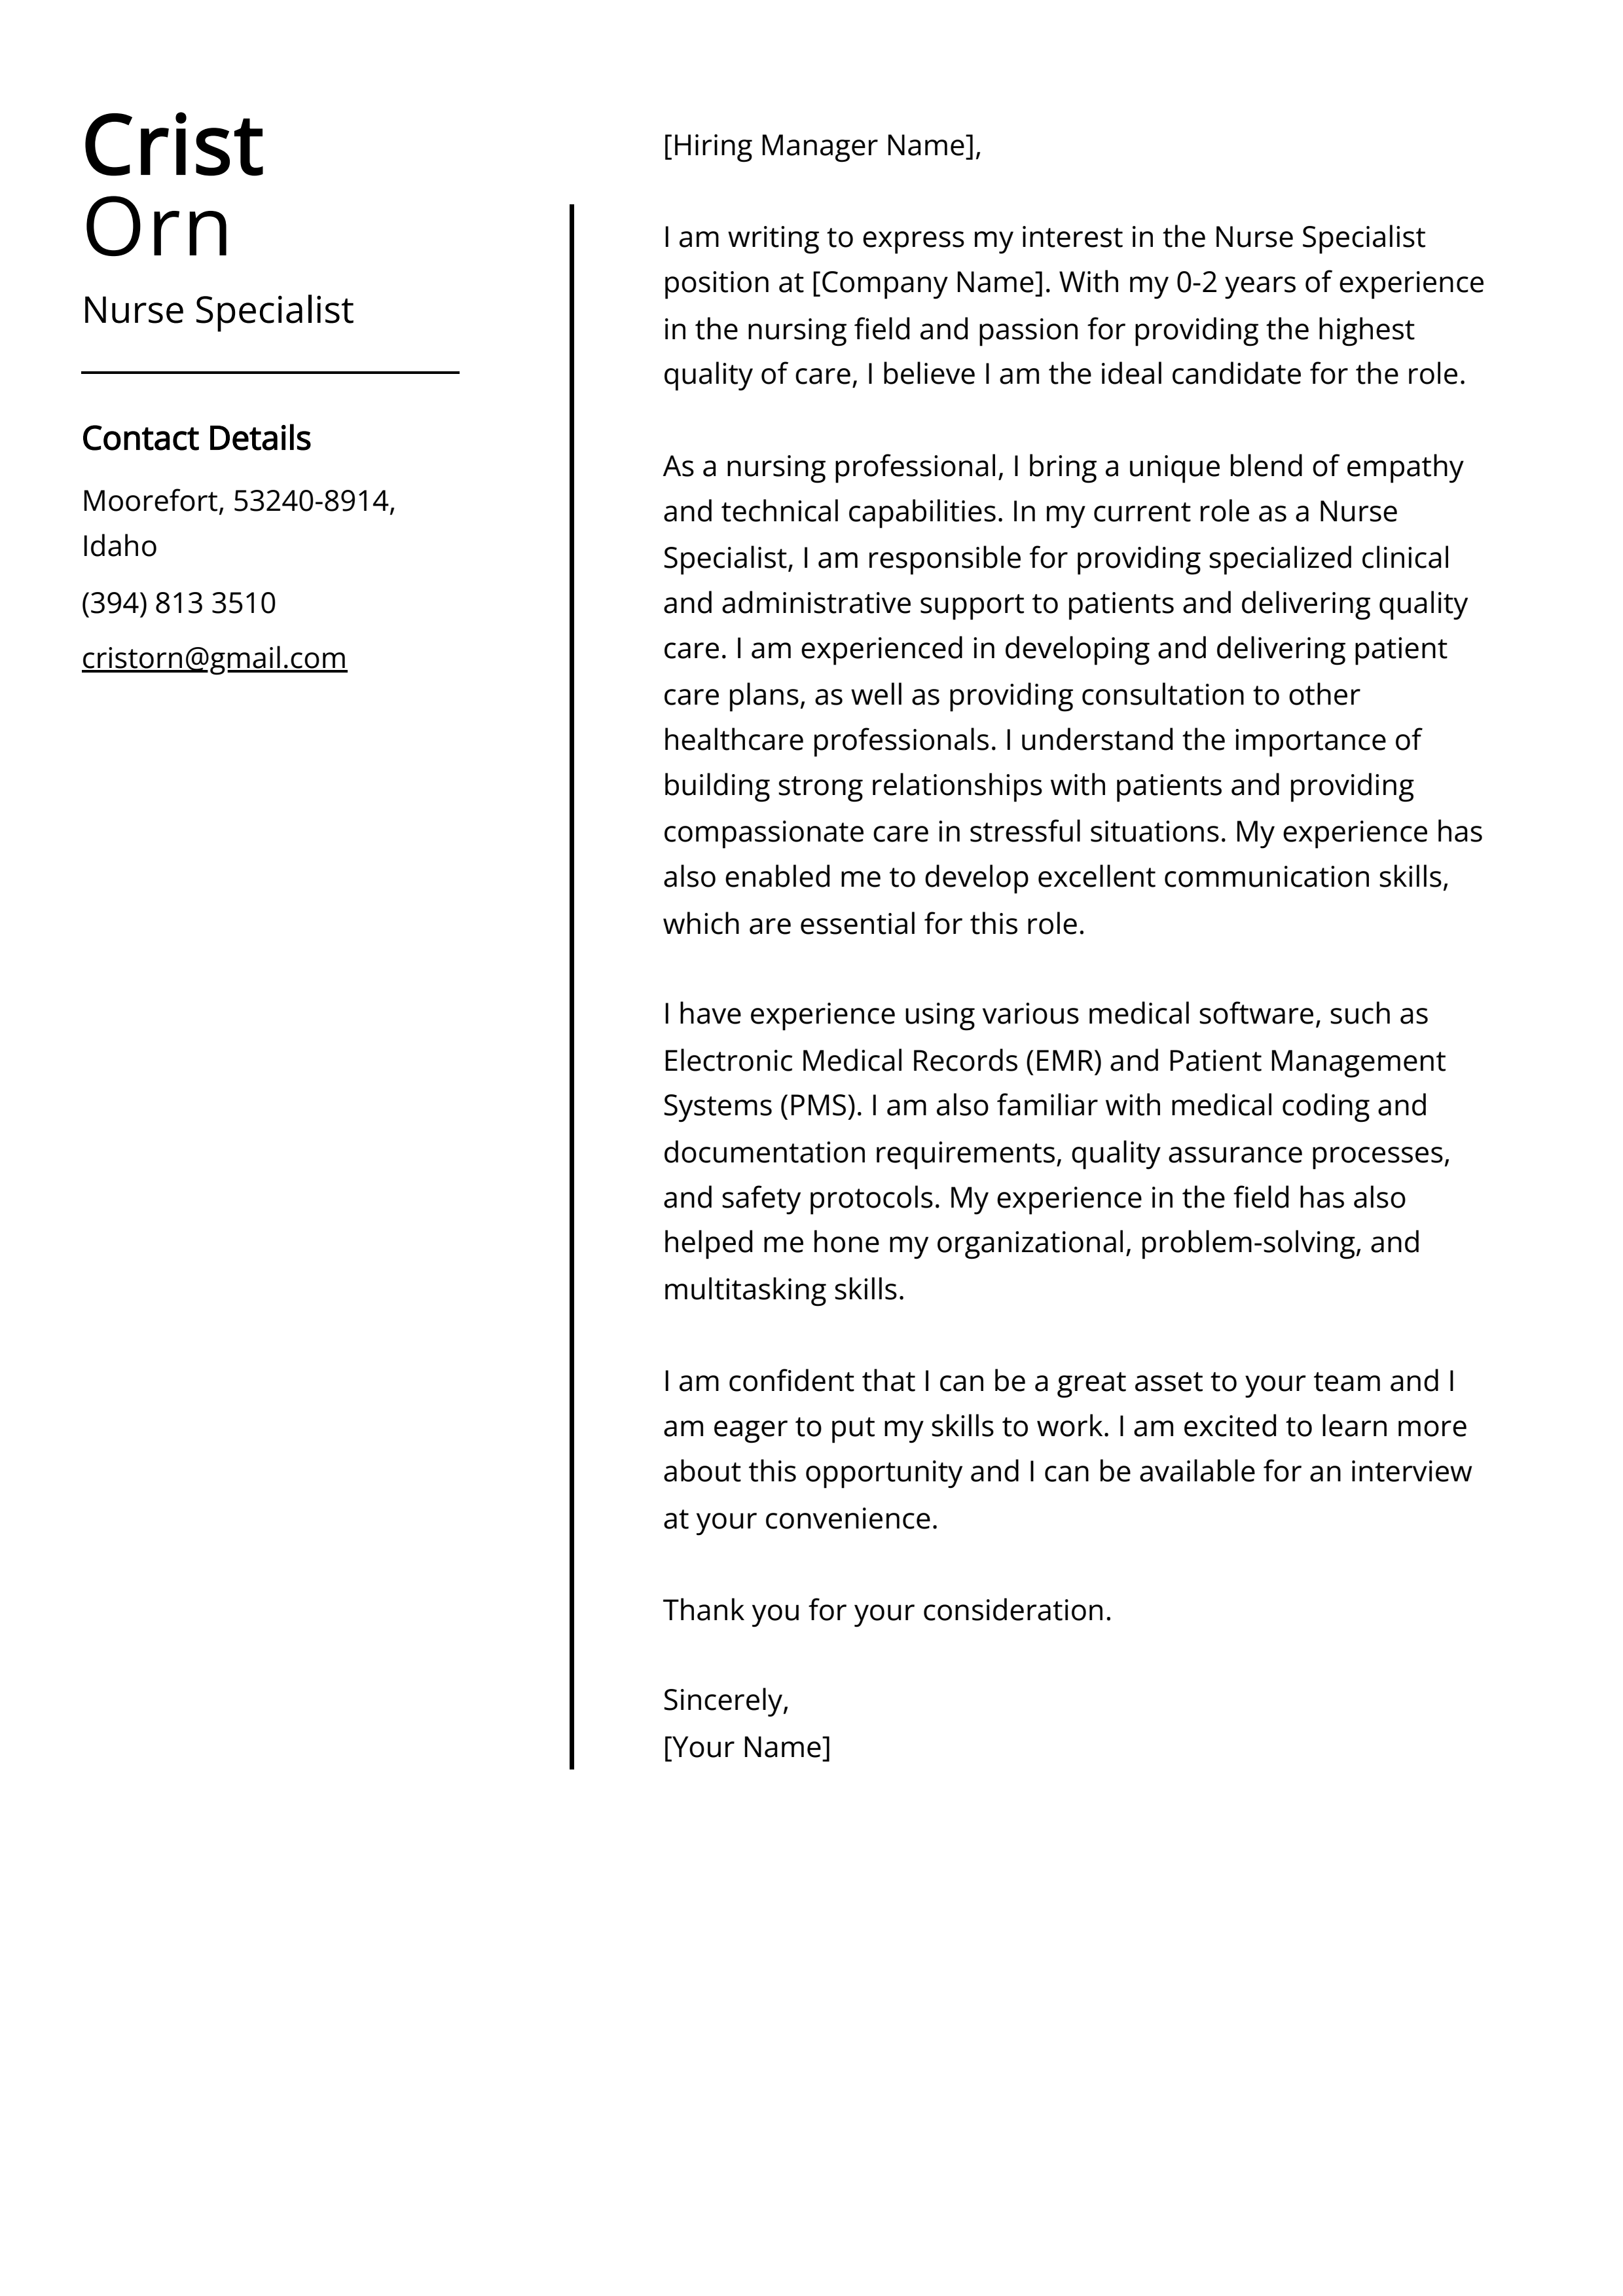 Nurse Specialist Cover Letter Example